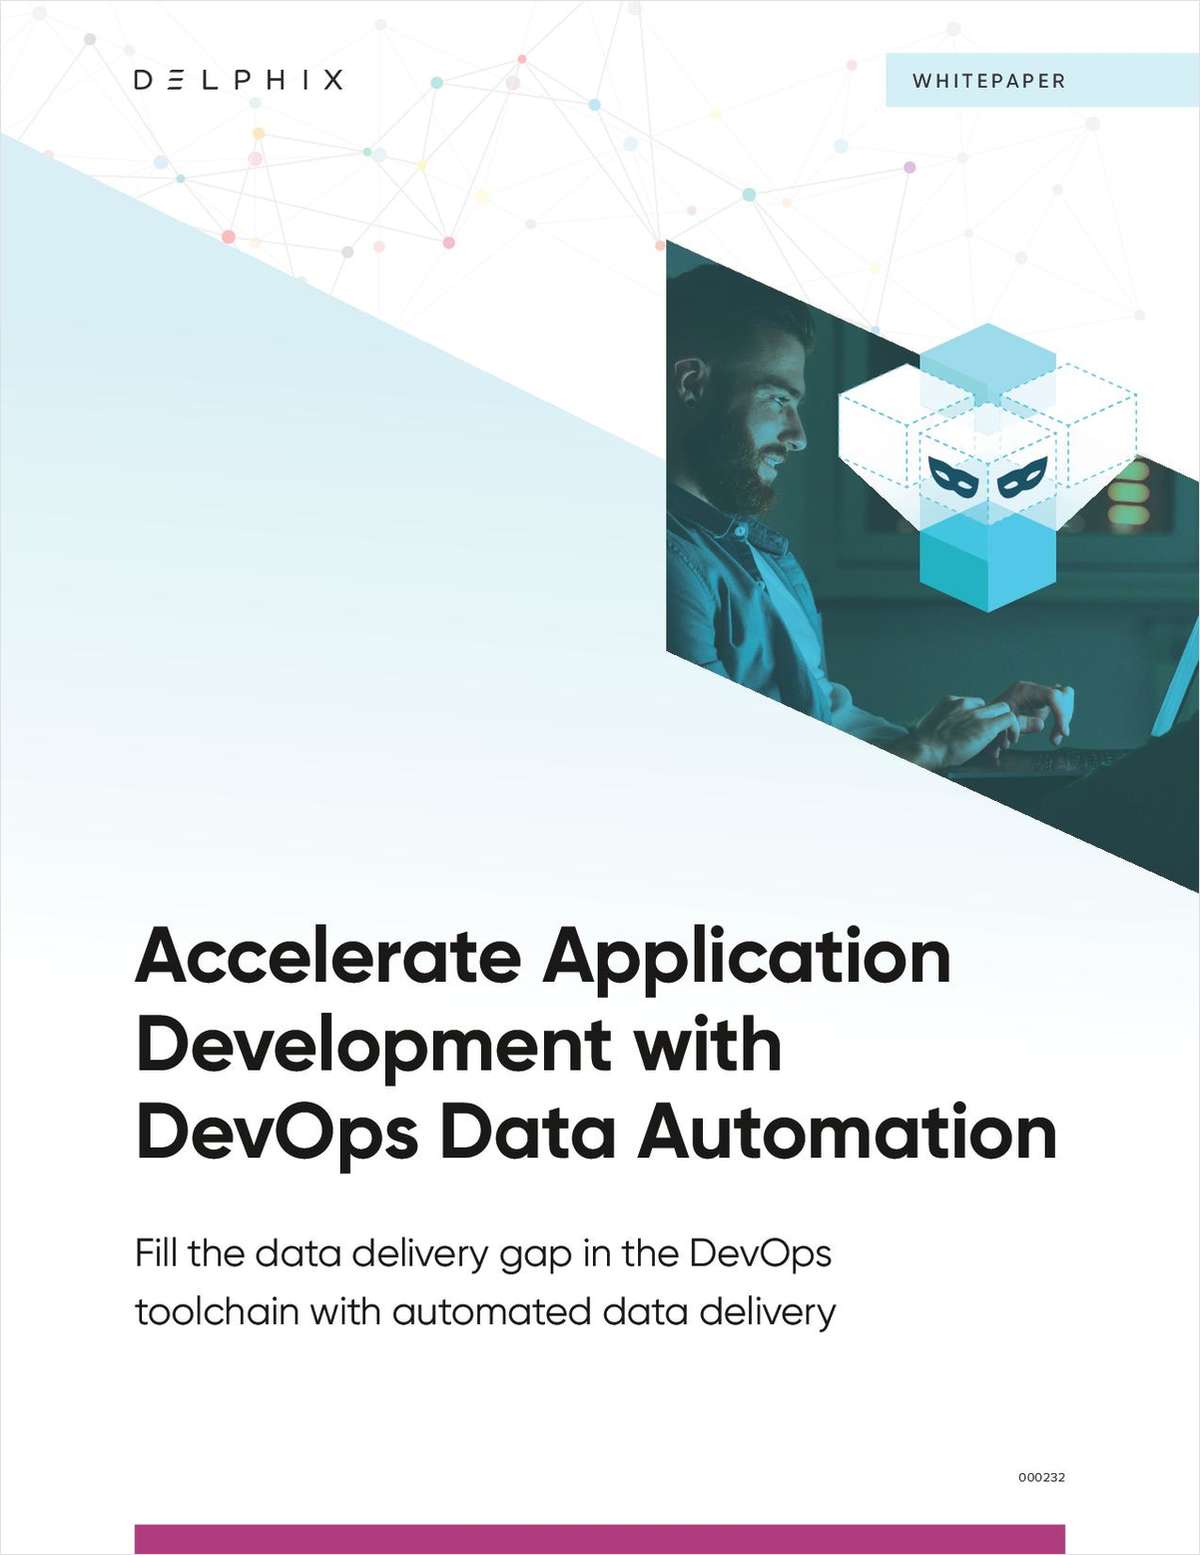 Accelerate App Dev with DevOps Data Automation